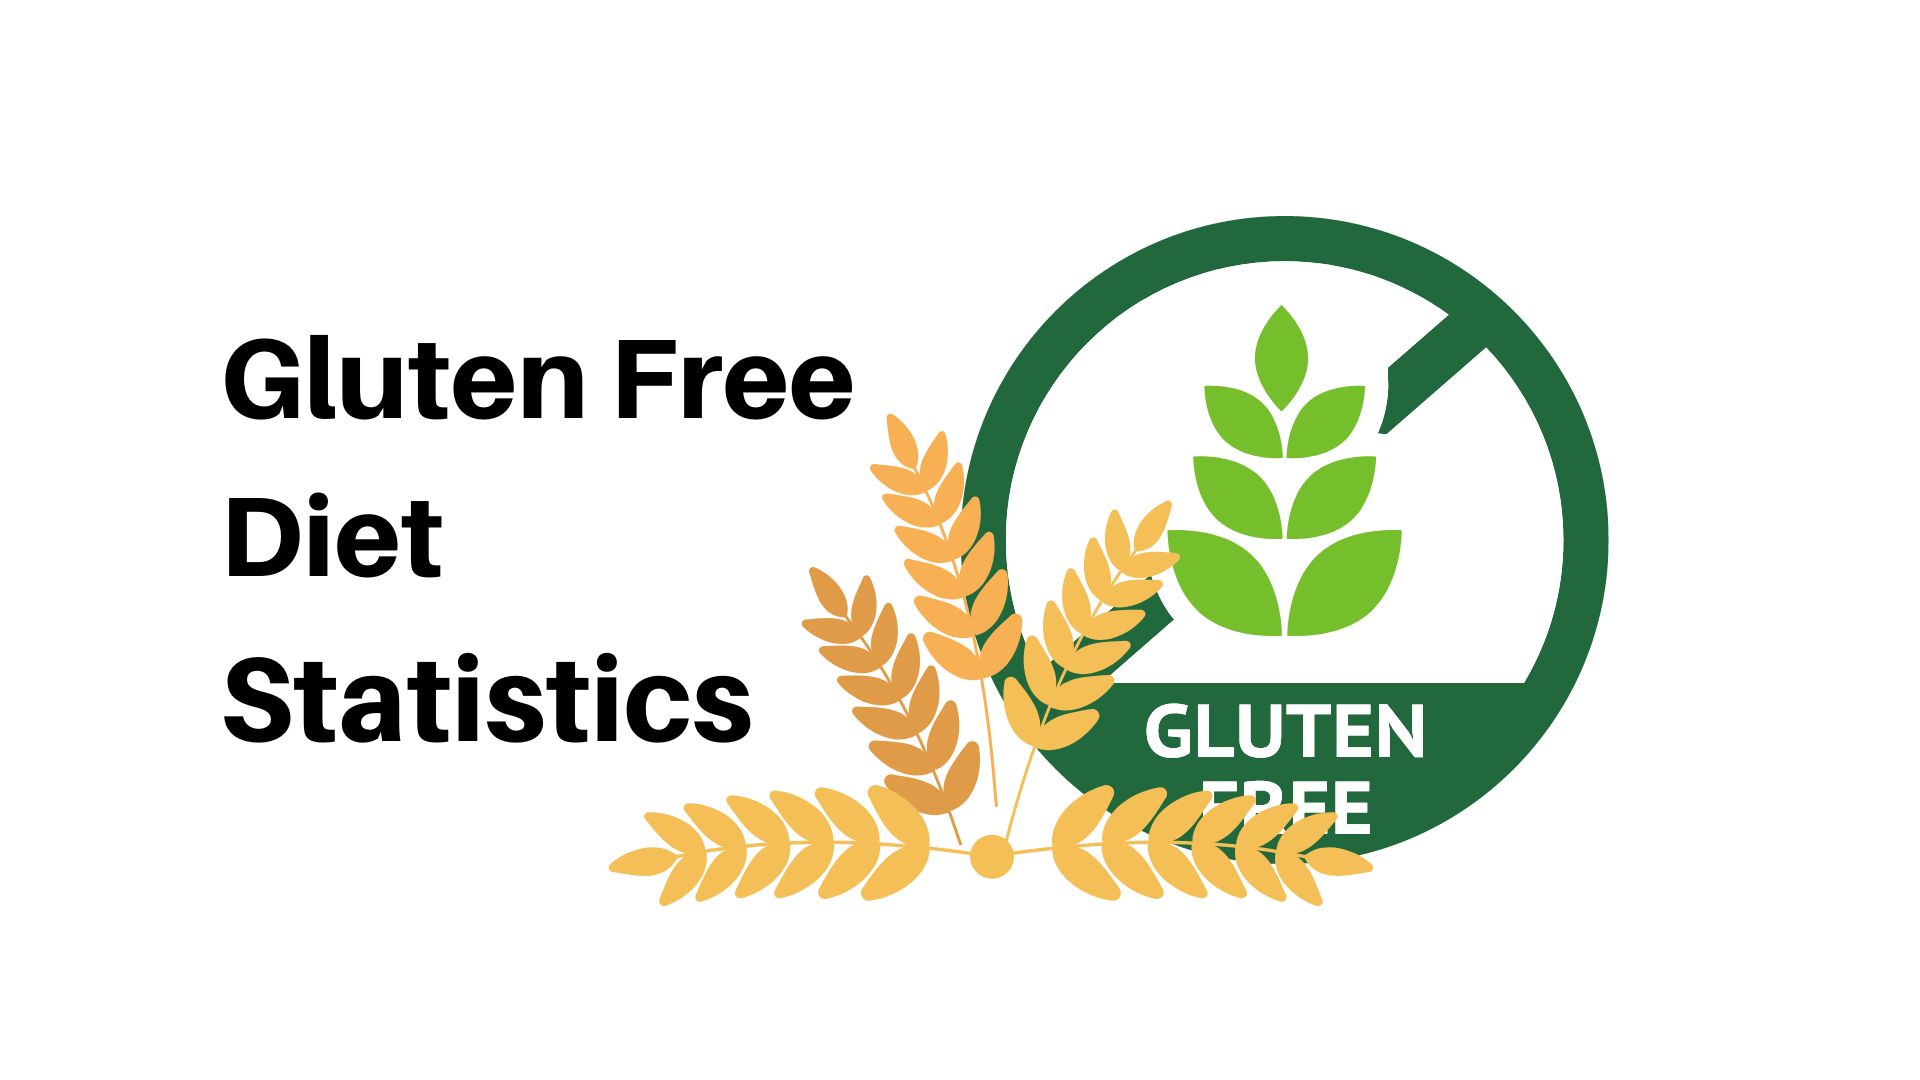 Gluten Free Diet Statistics By Demographics, Market Forecast, Types of Diet and Shopping Habits